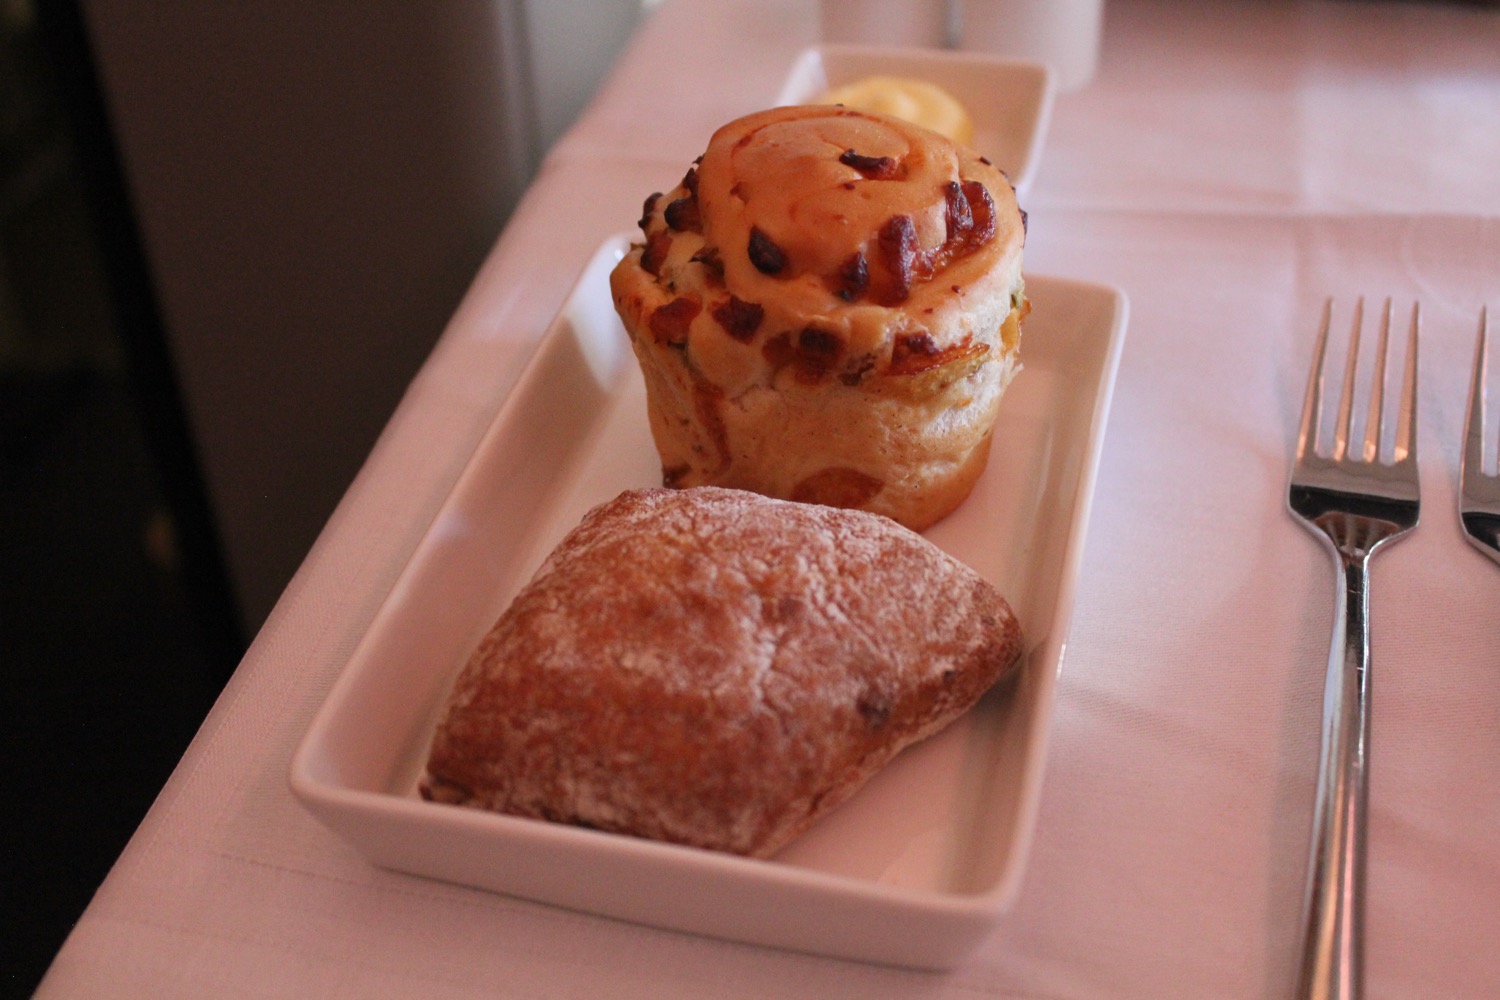 plate of pastries on the table